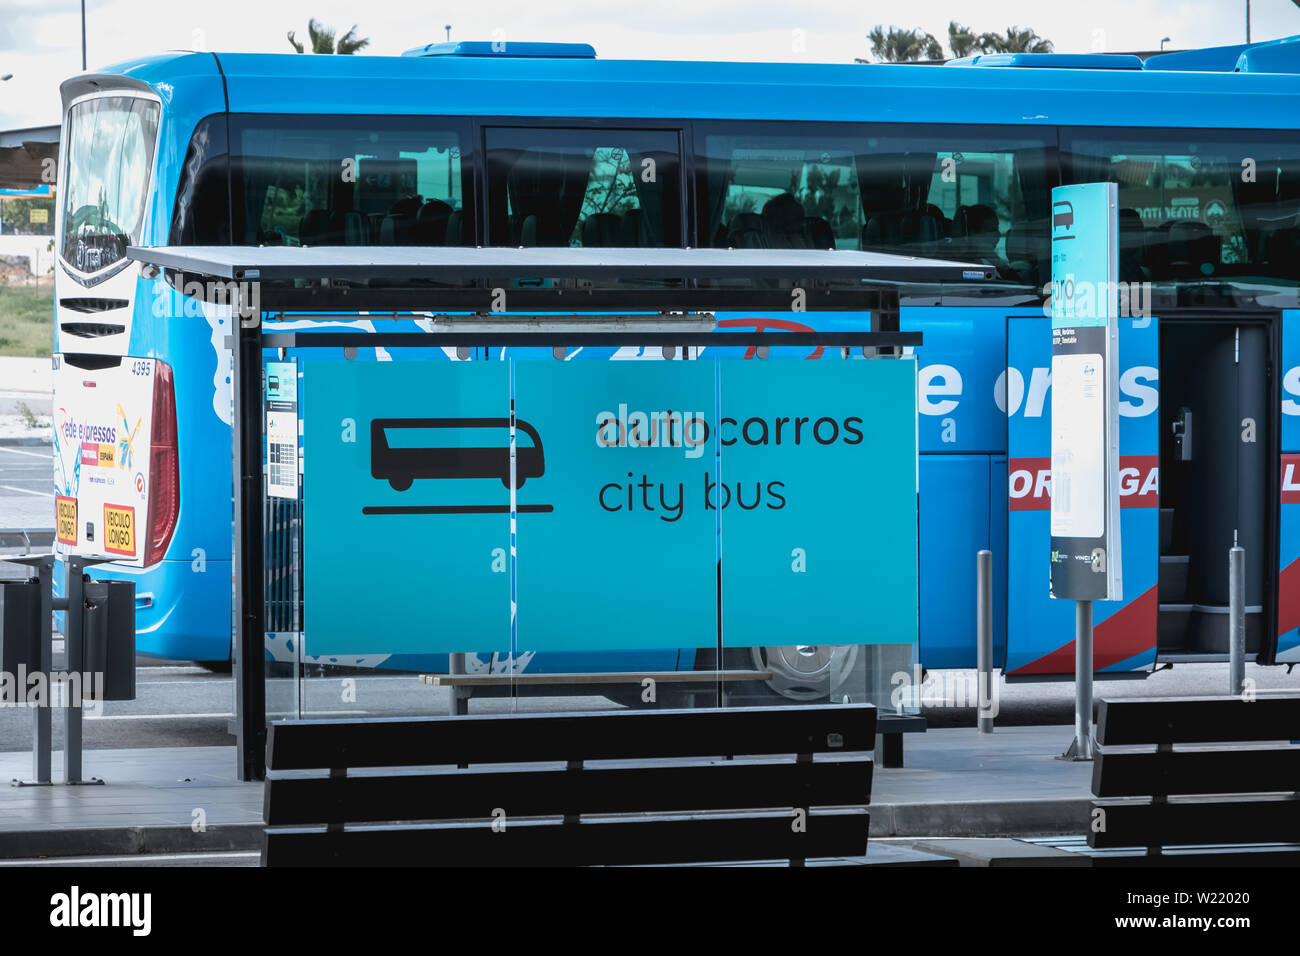 Faro, Portugal - May 3, 2018: Passengers boarding a City-Bus bus in the car park of Faro International Airport on a spring day Stock Photo